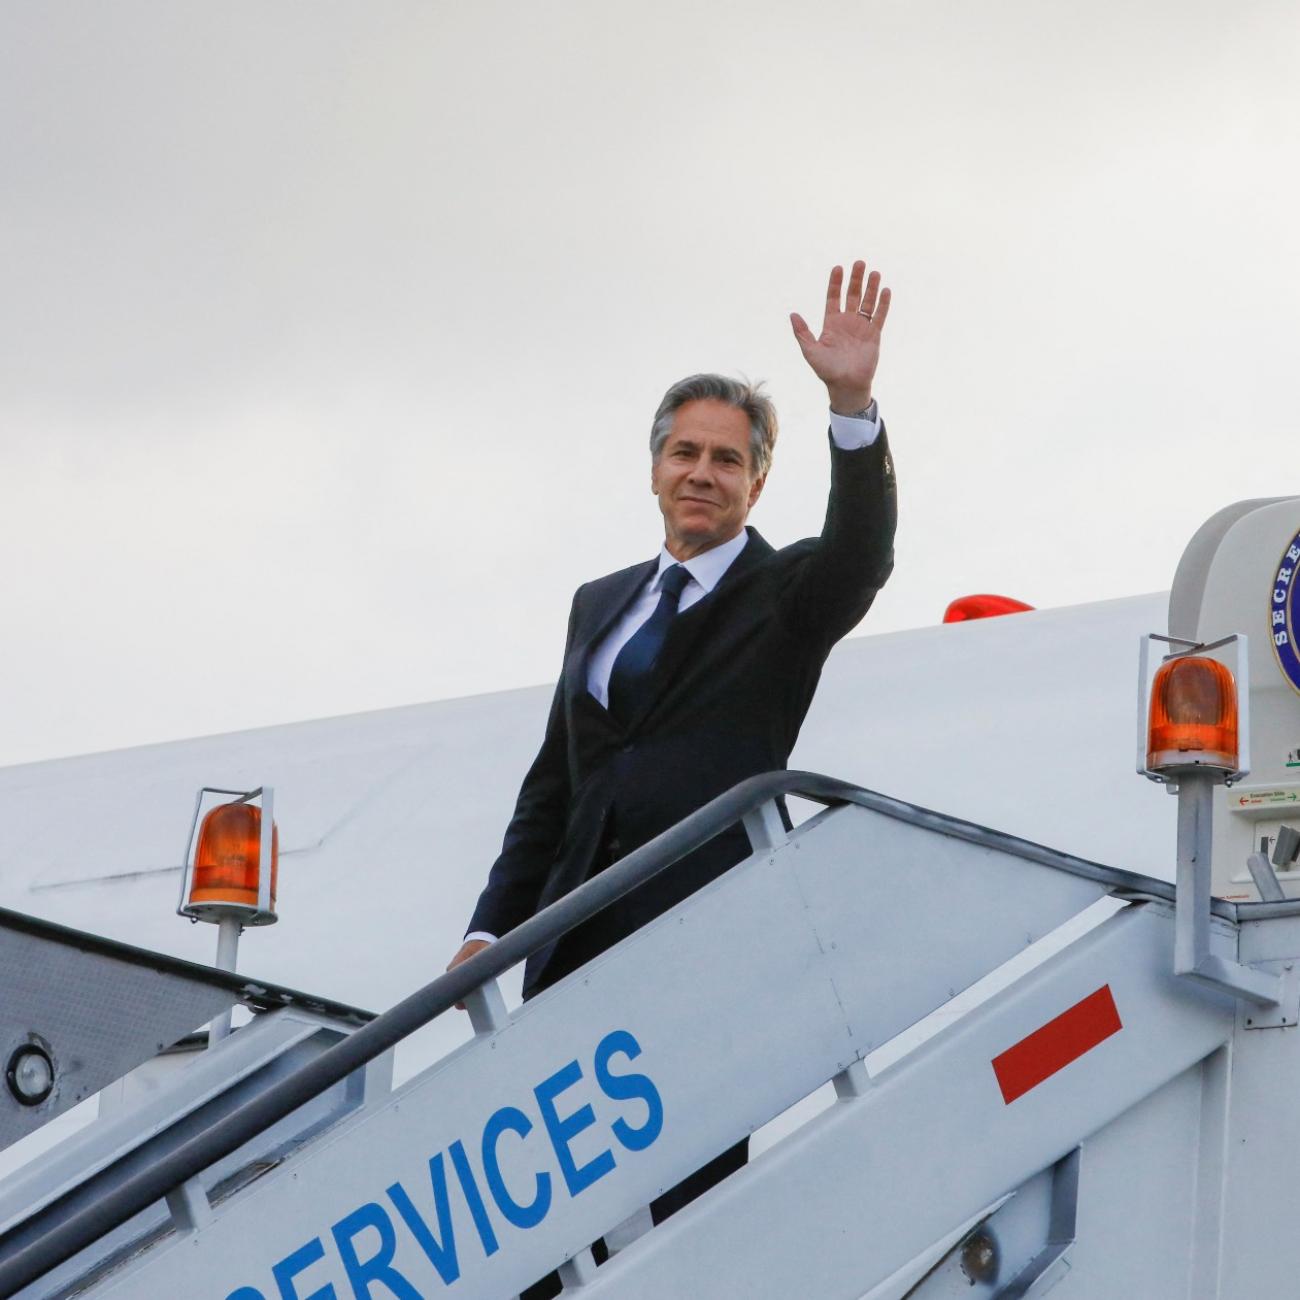 U.S. Secretary of State Antony Blinken waves as he departs from Benito Juarez International Airport after attending a U.S.-Mexico High-Level Economic Dialogue, in Mexico City, Mexico September 12, 2022.